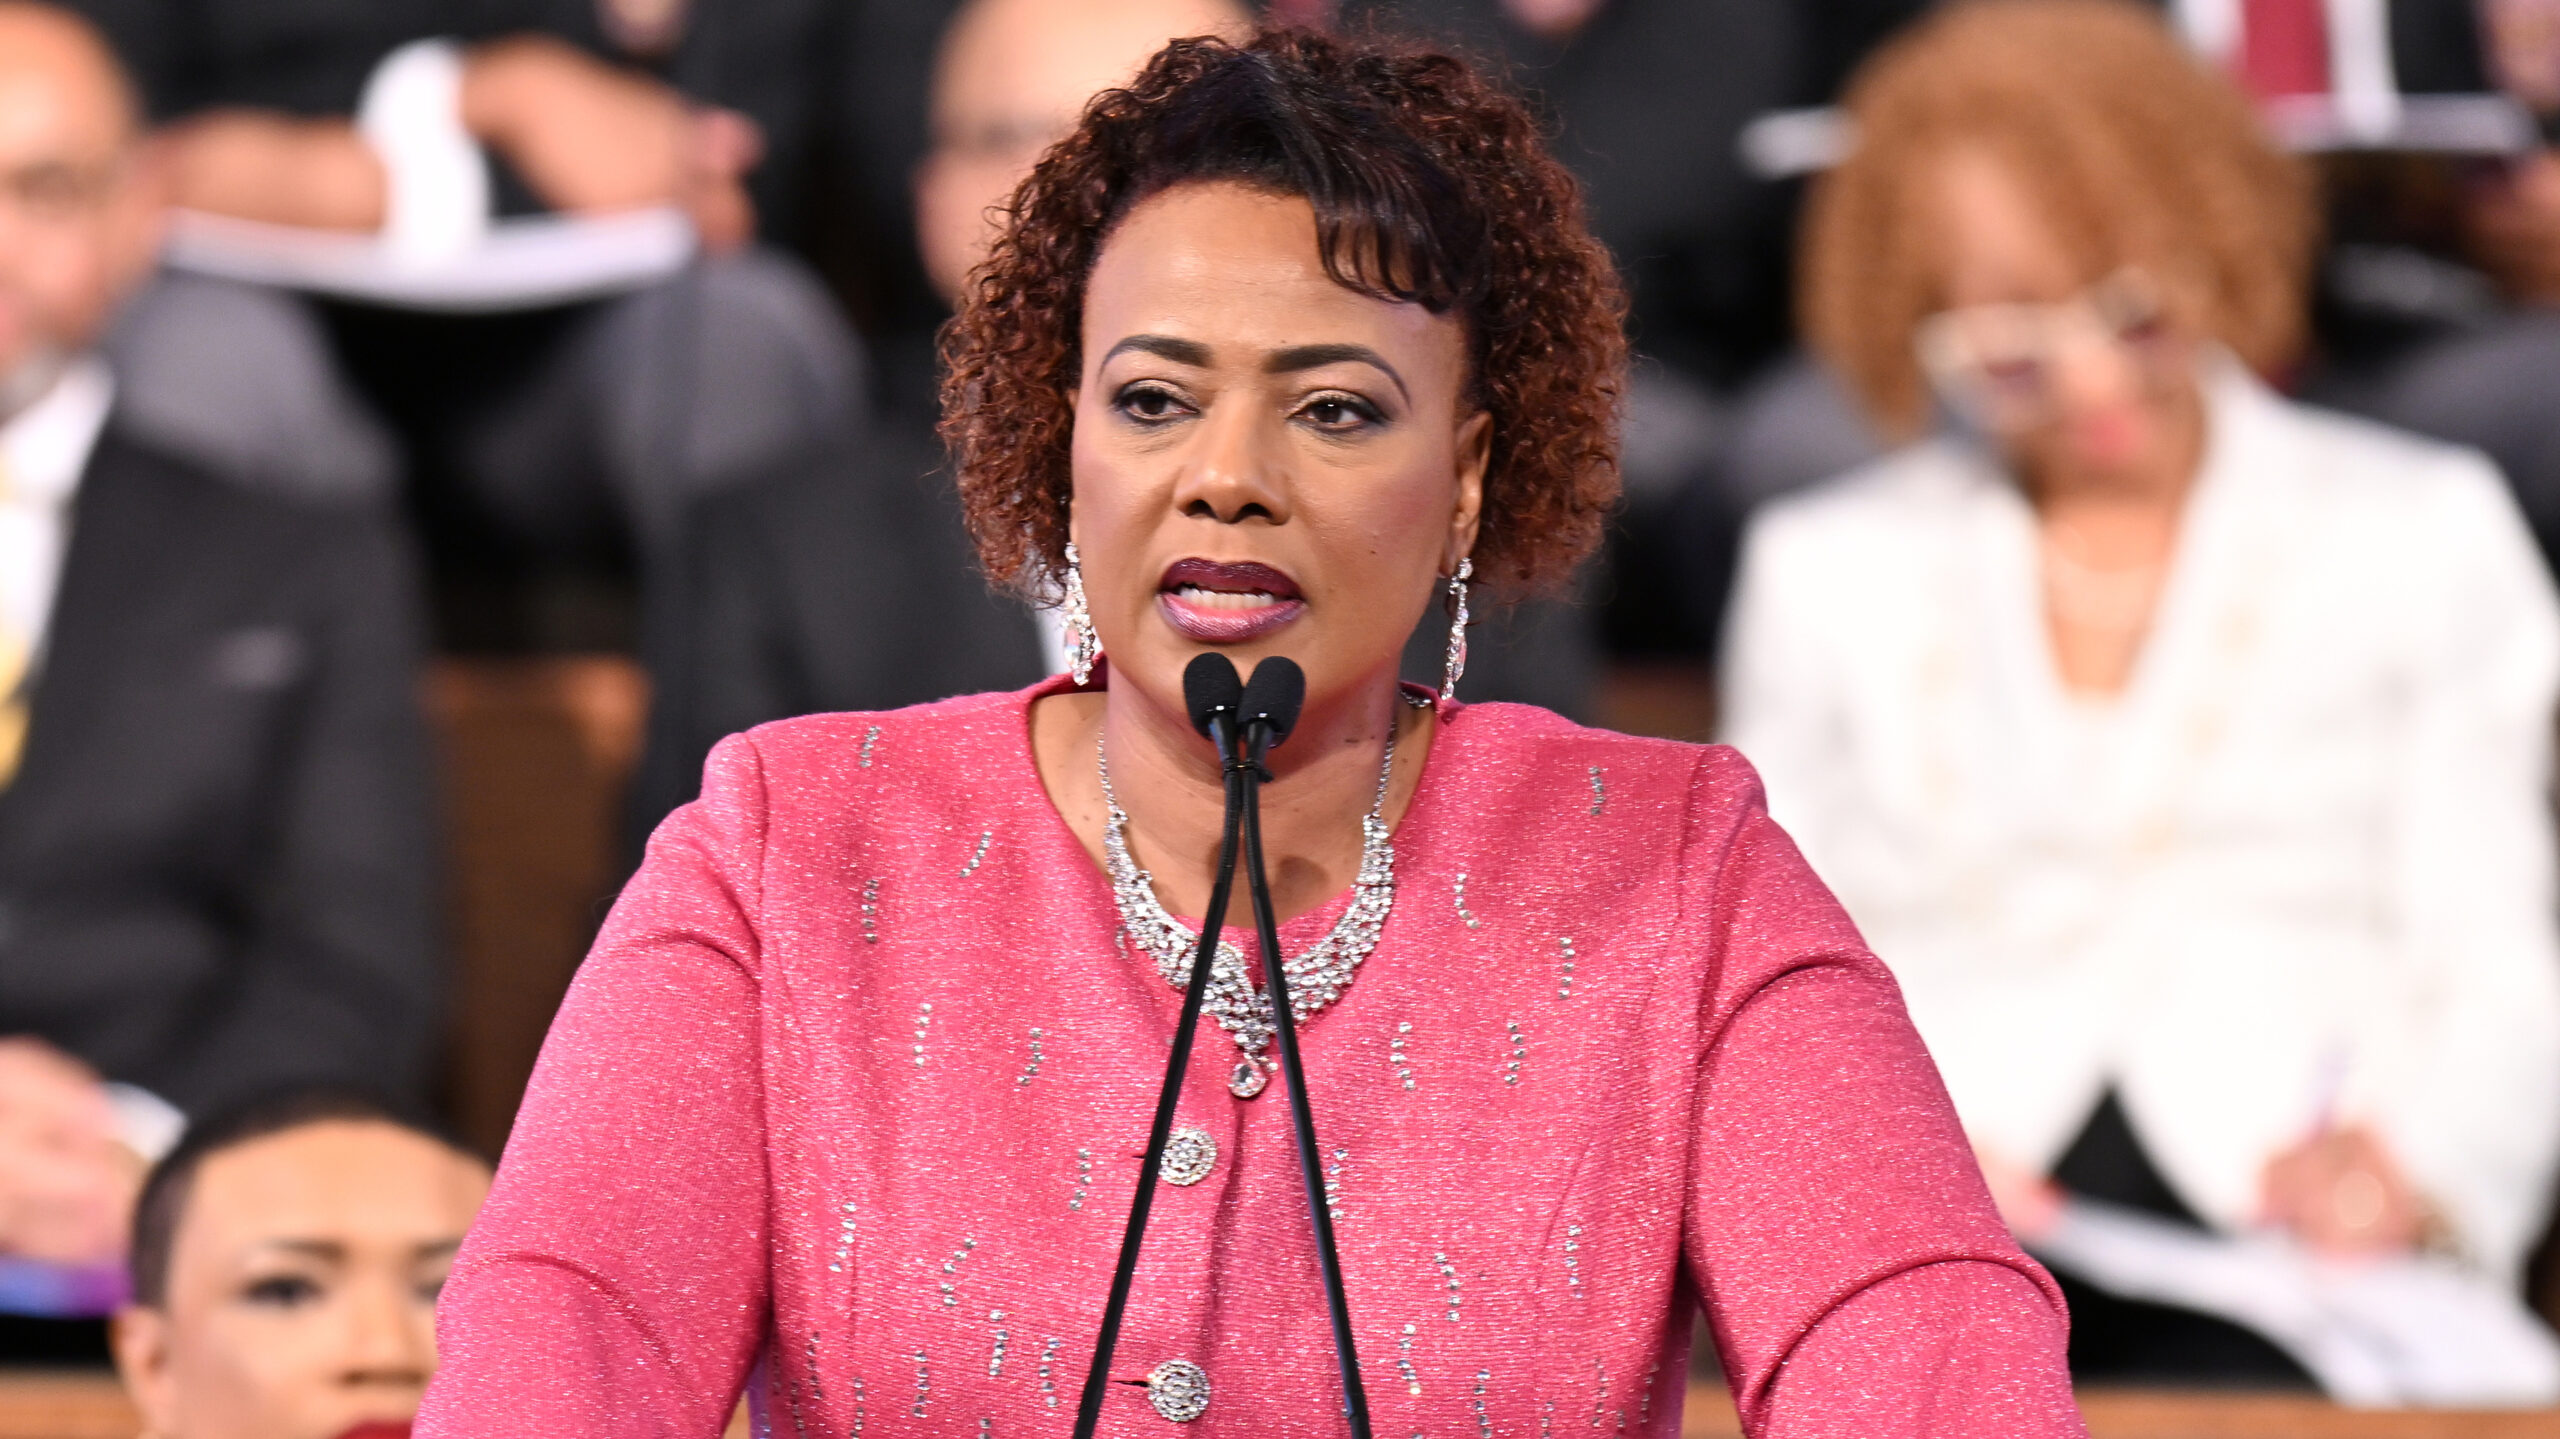 Bernice King, MLK’s daughter, highlights black men’s attraction to Donald Trump and his campaign